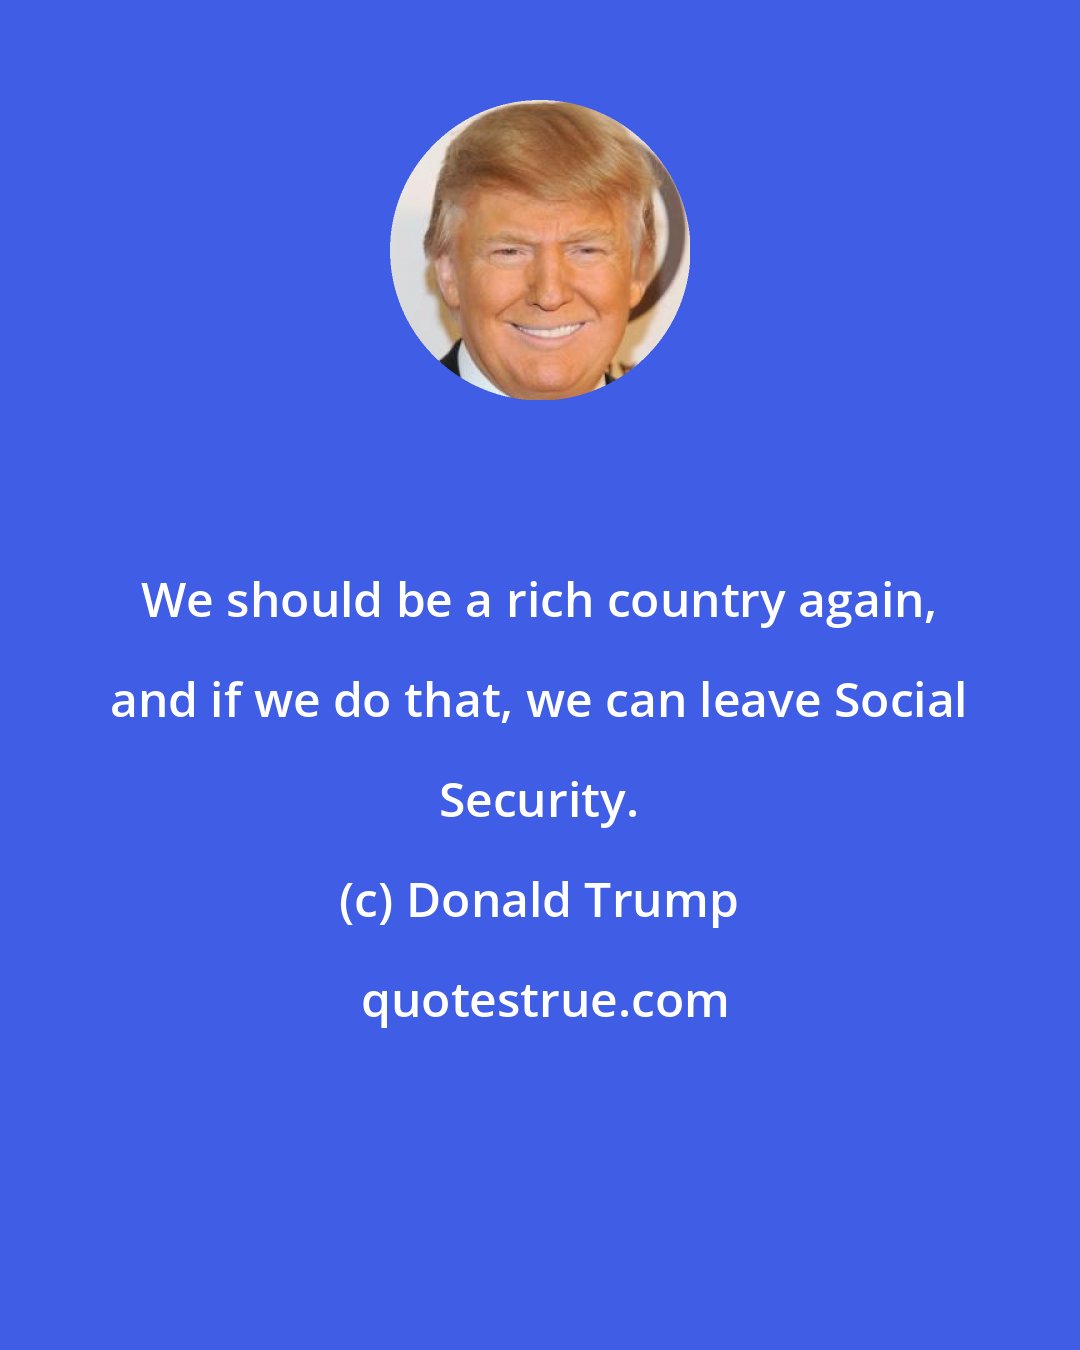 Donald Trump: We should be a rich country again, and if we do that, we can leave Social Security.